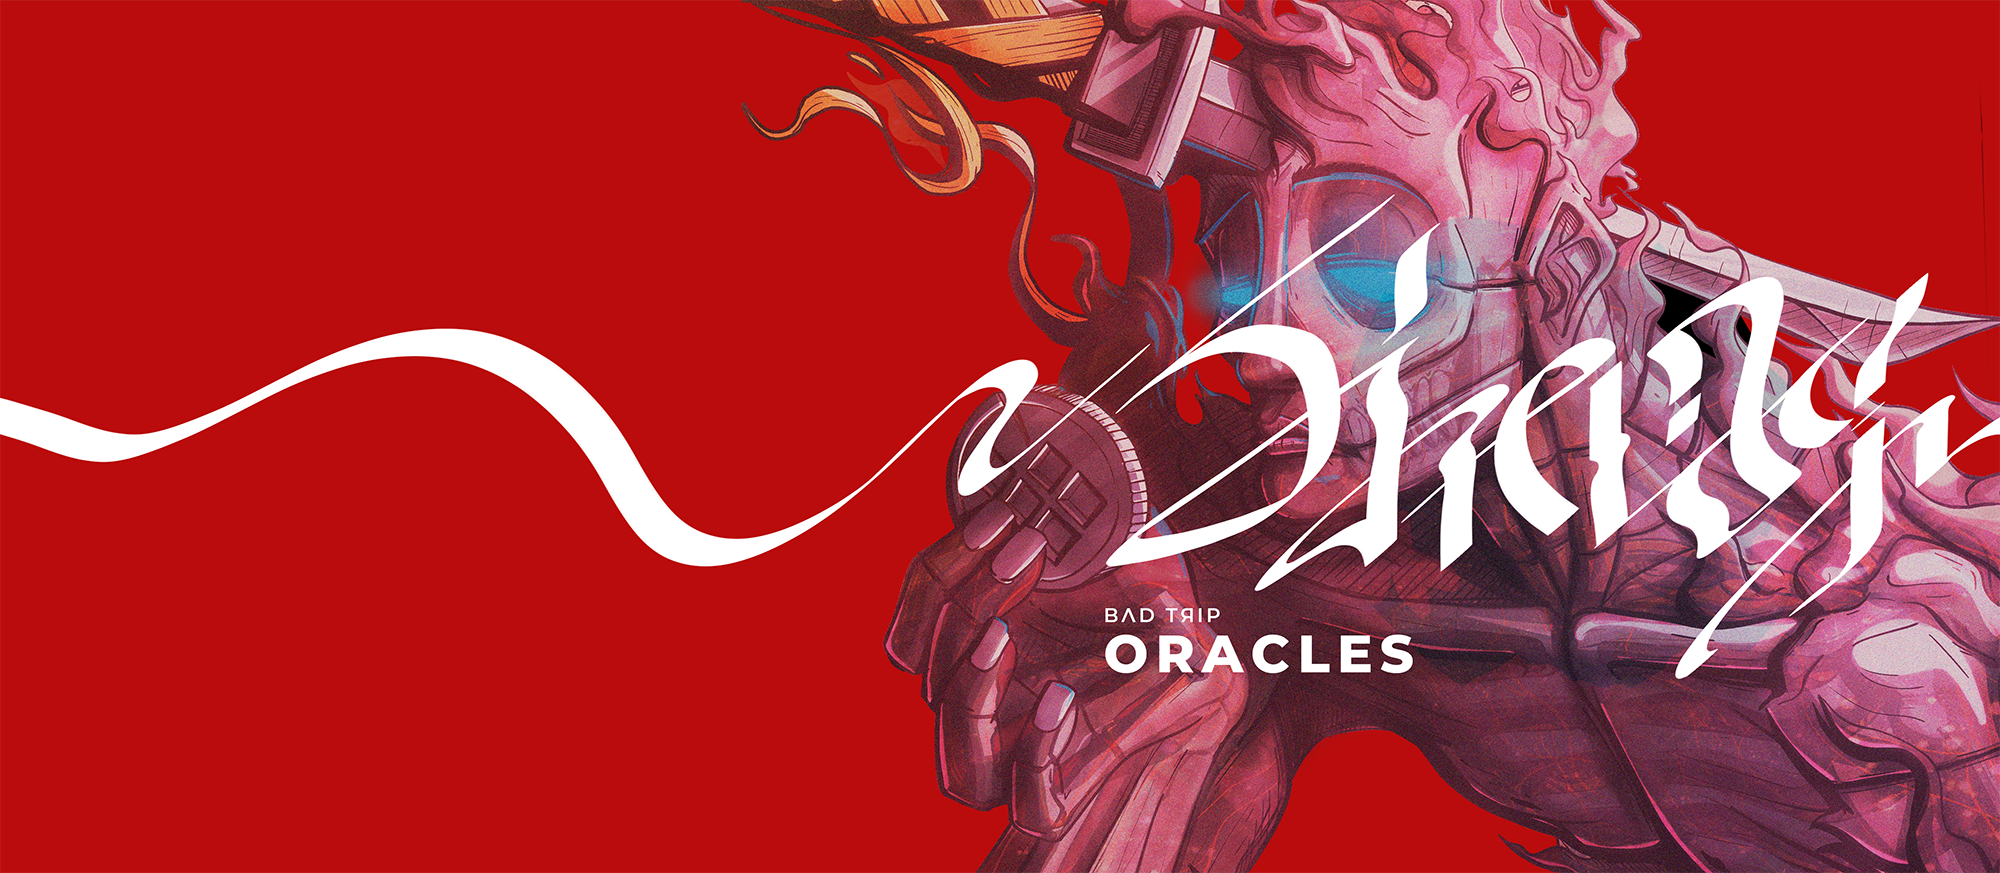 B.T. ORACLES banner